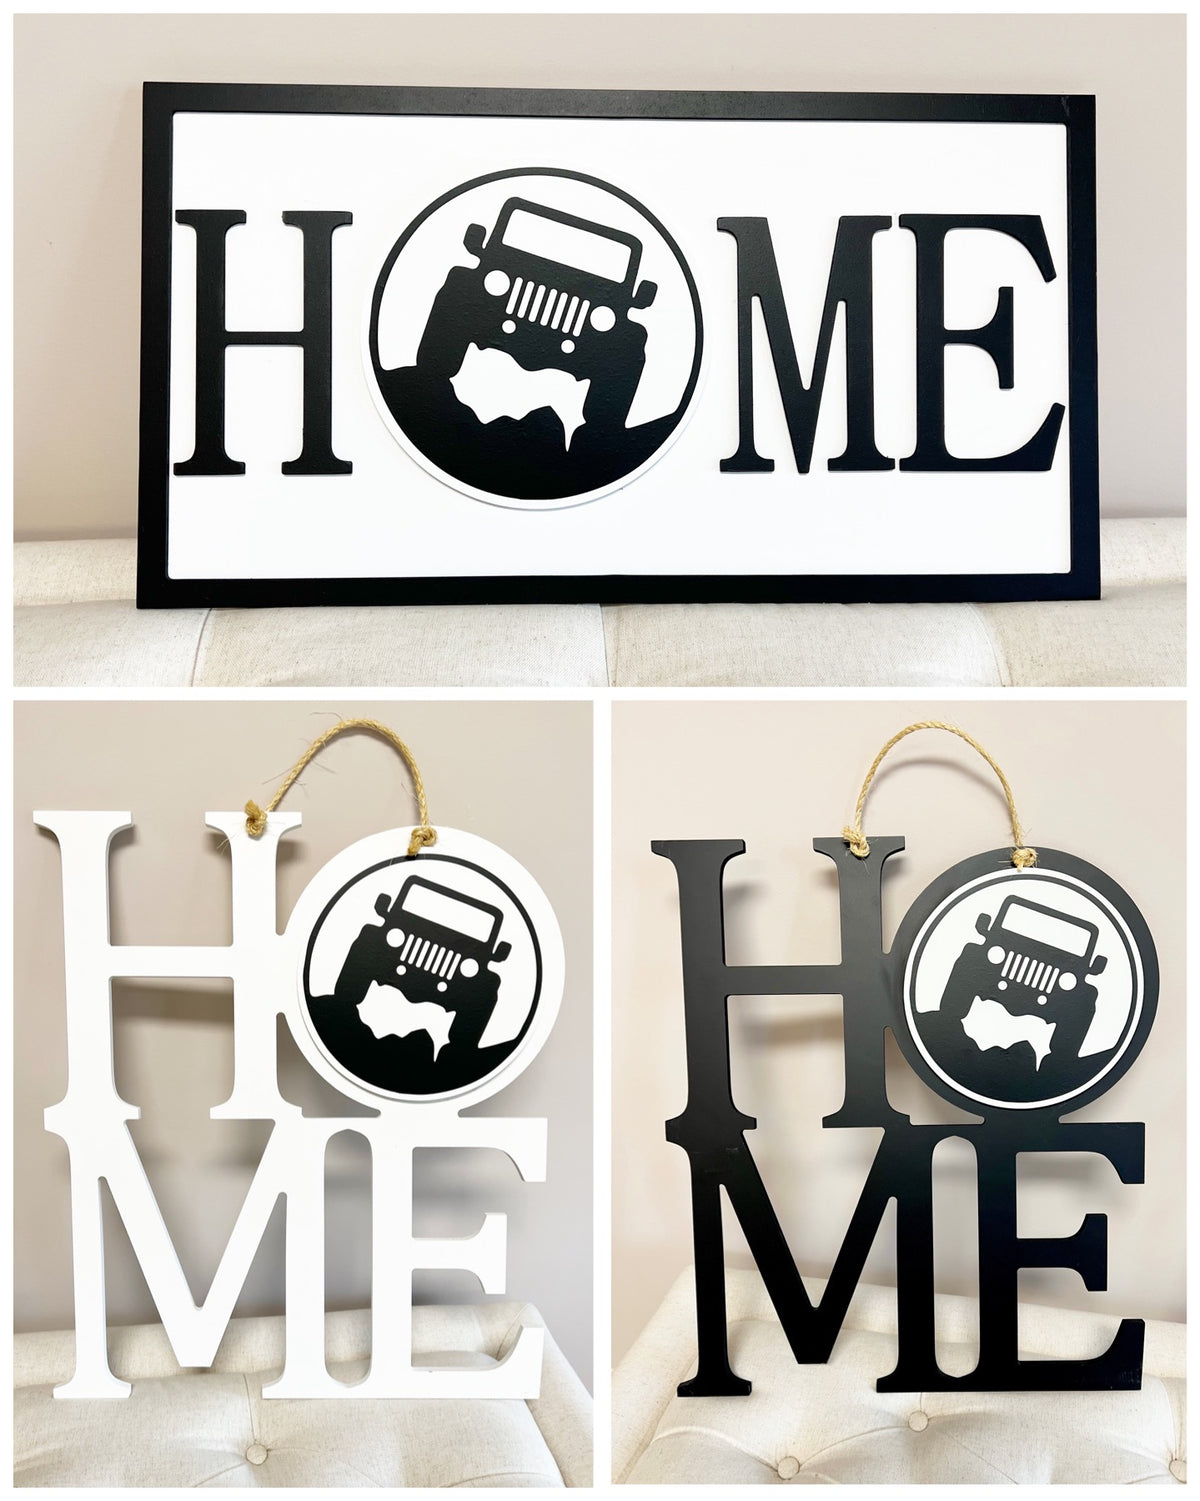 Jeep Wrangler Off Road 4x4 Interchangeable Wooden Home Sign Interior or Exterior Door Decor Door Hanger - One sign that you can display all year long. Choose your wood base and your favorite interchangeable medallions and simply swap out the medallions as the holidays and seasons come and go. 